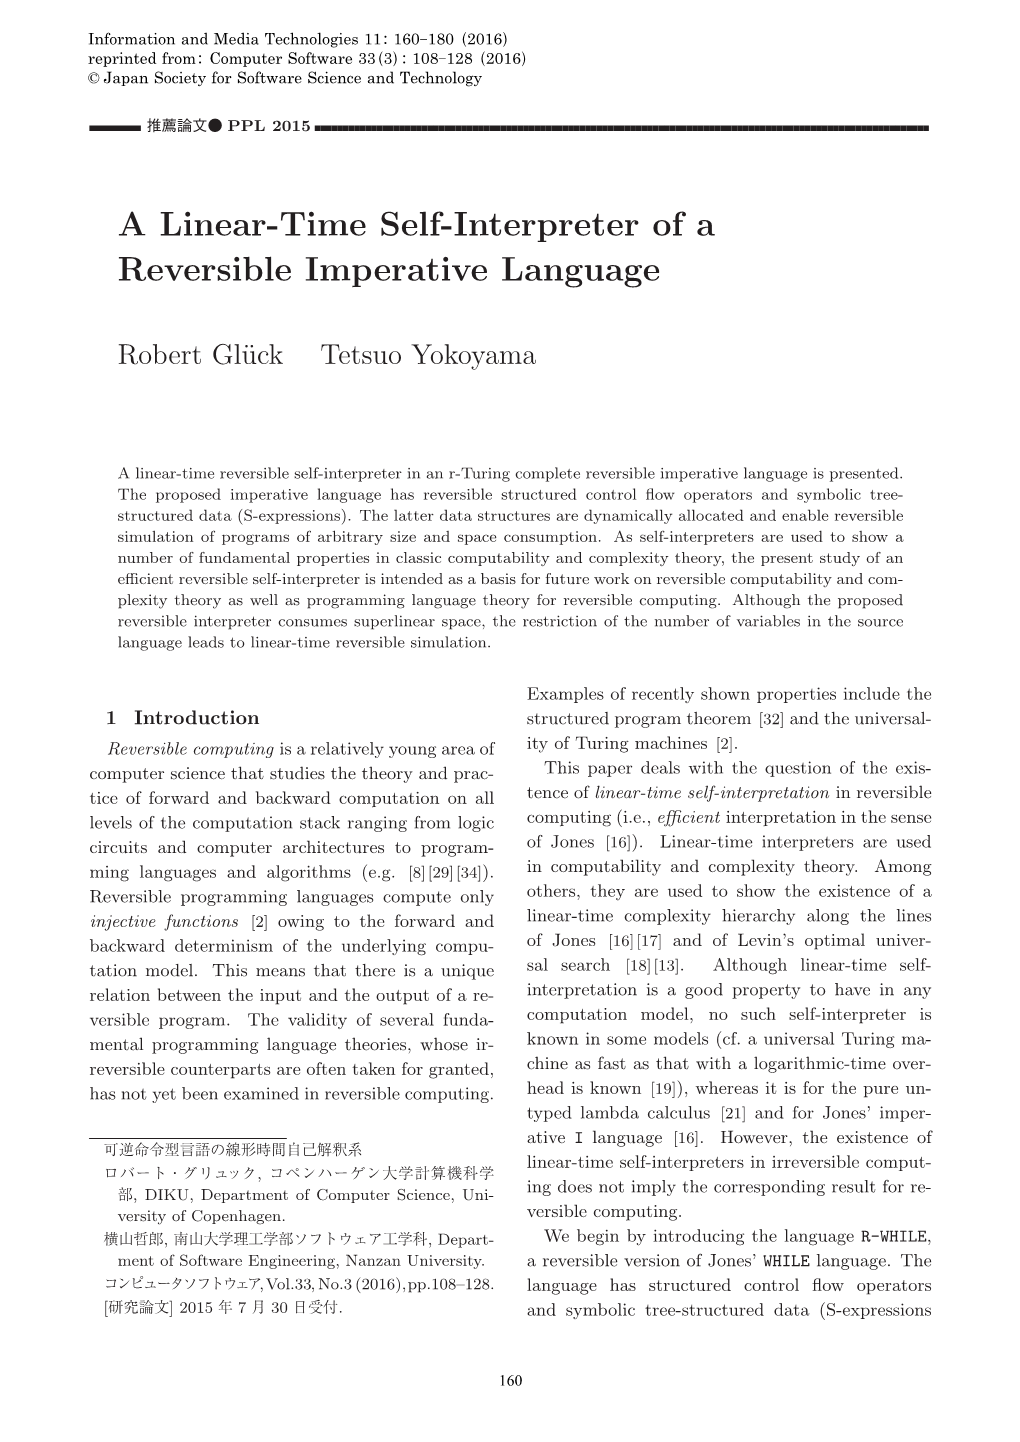 A Linear-Time Self-Interpreter of a Reversible Imperative Language